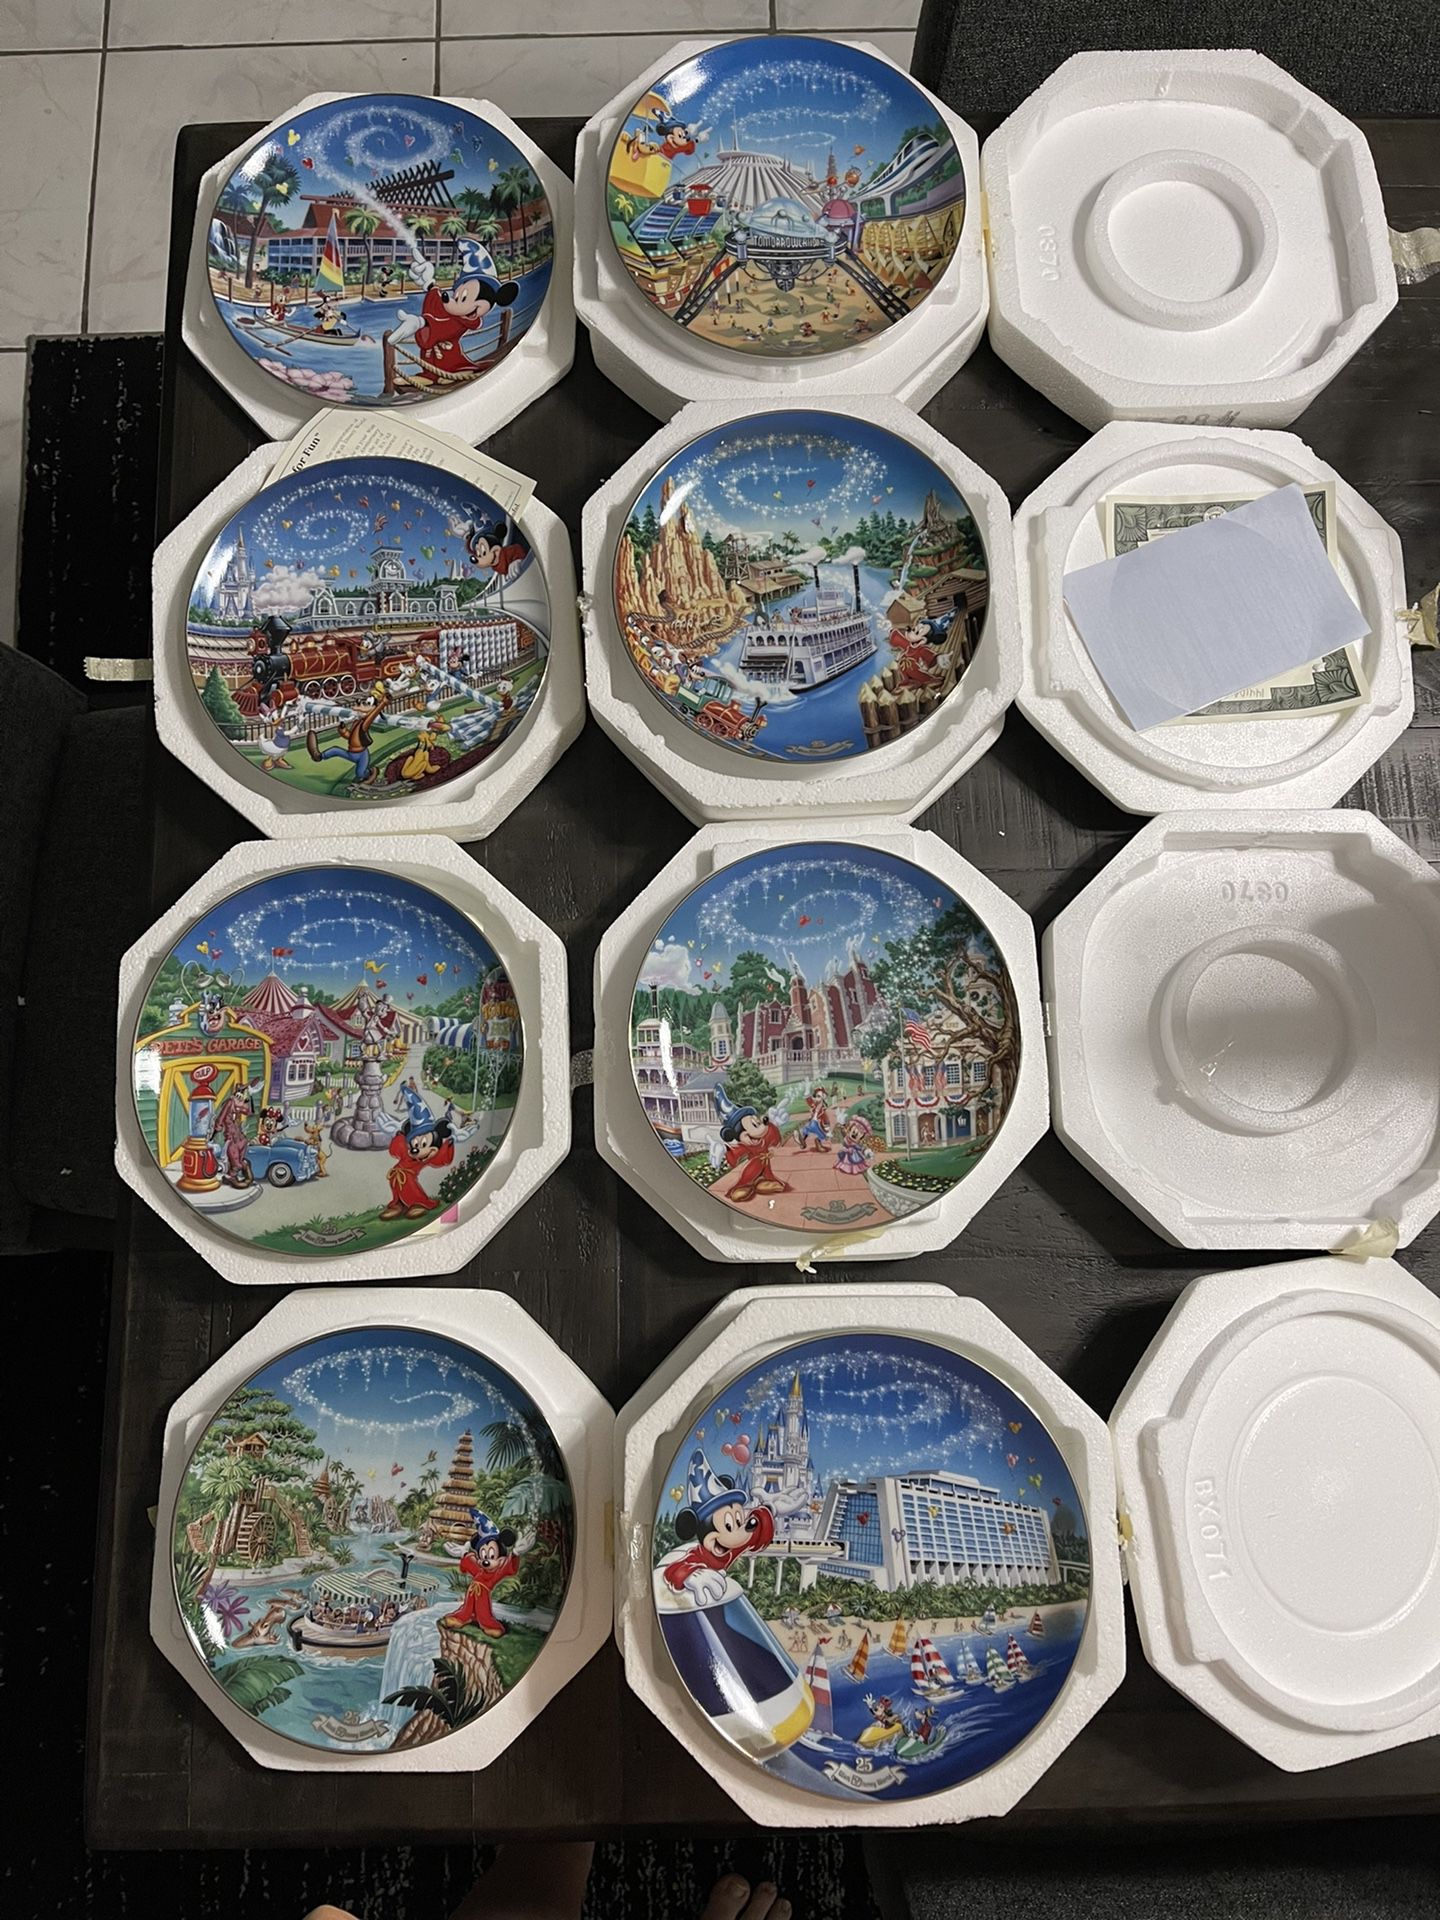  Mickey Mouse Walt Disney World 25th anniversary collector plates